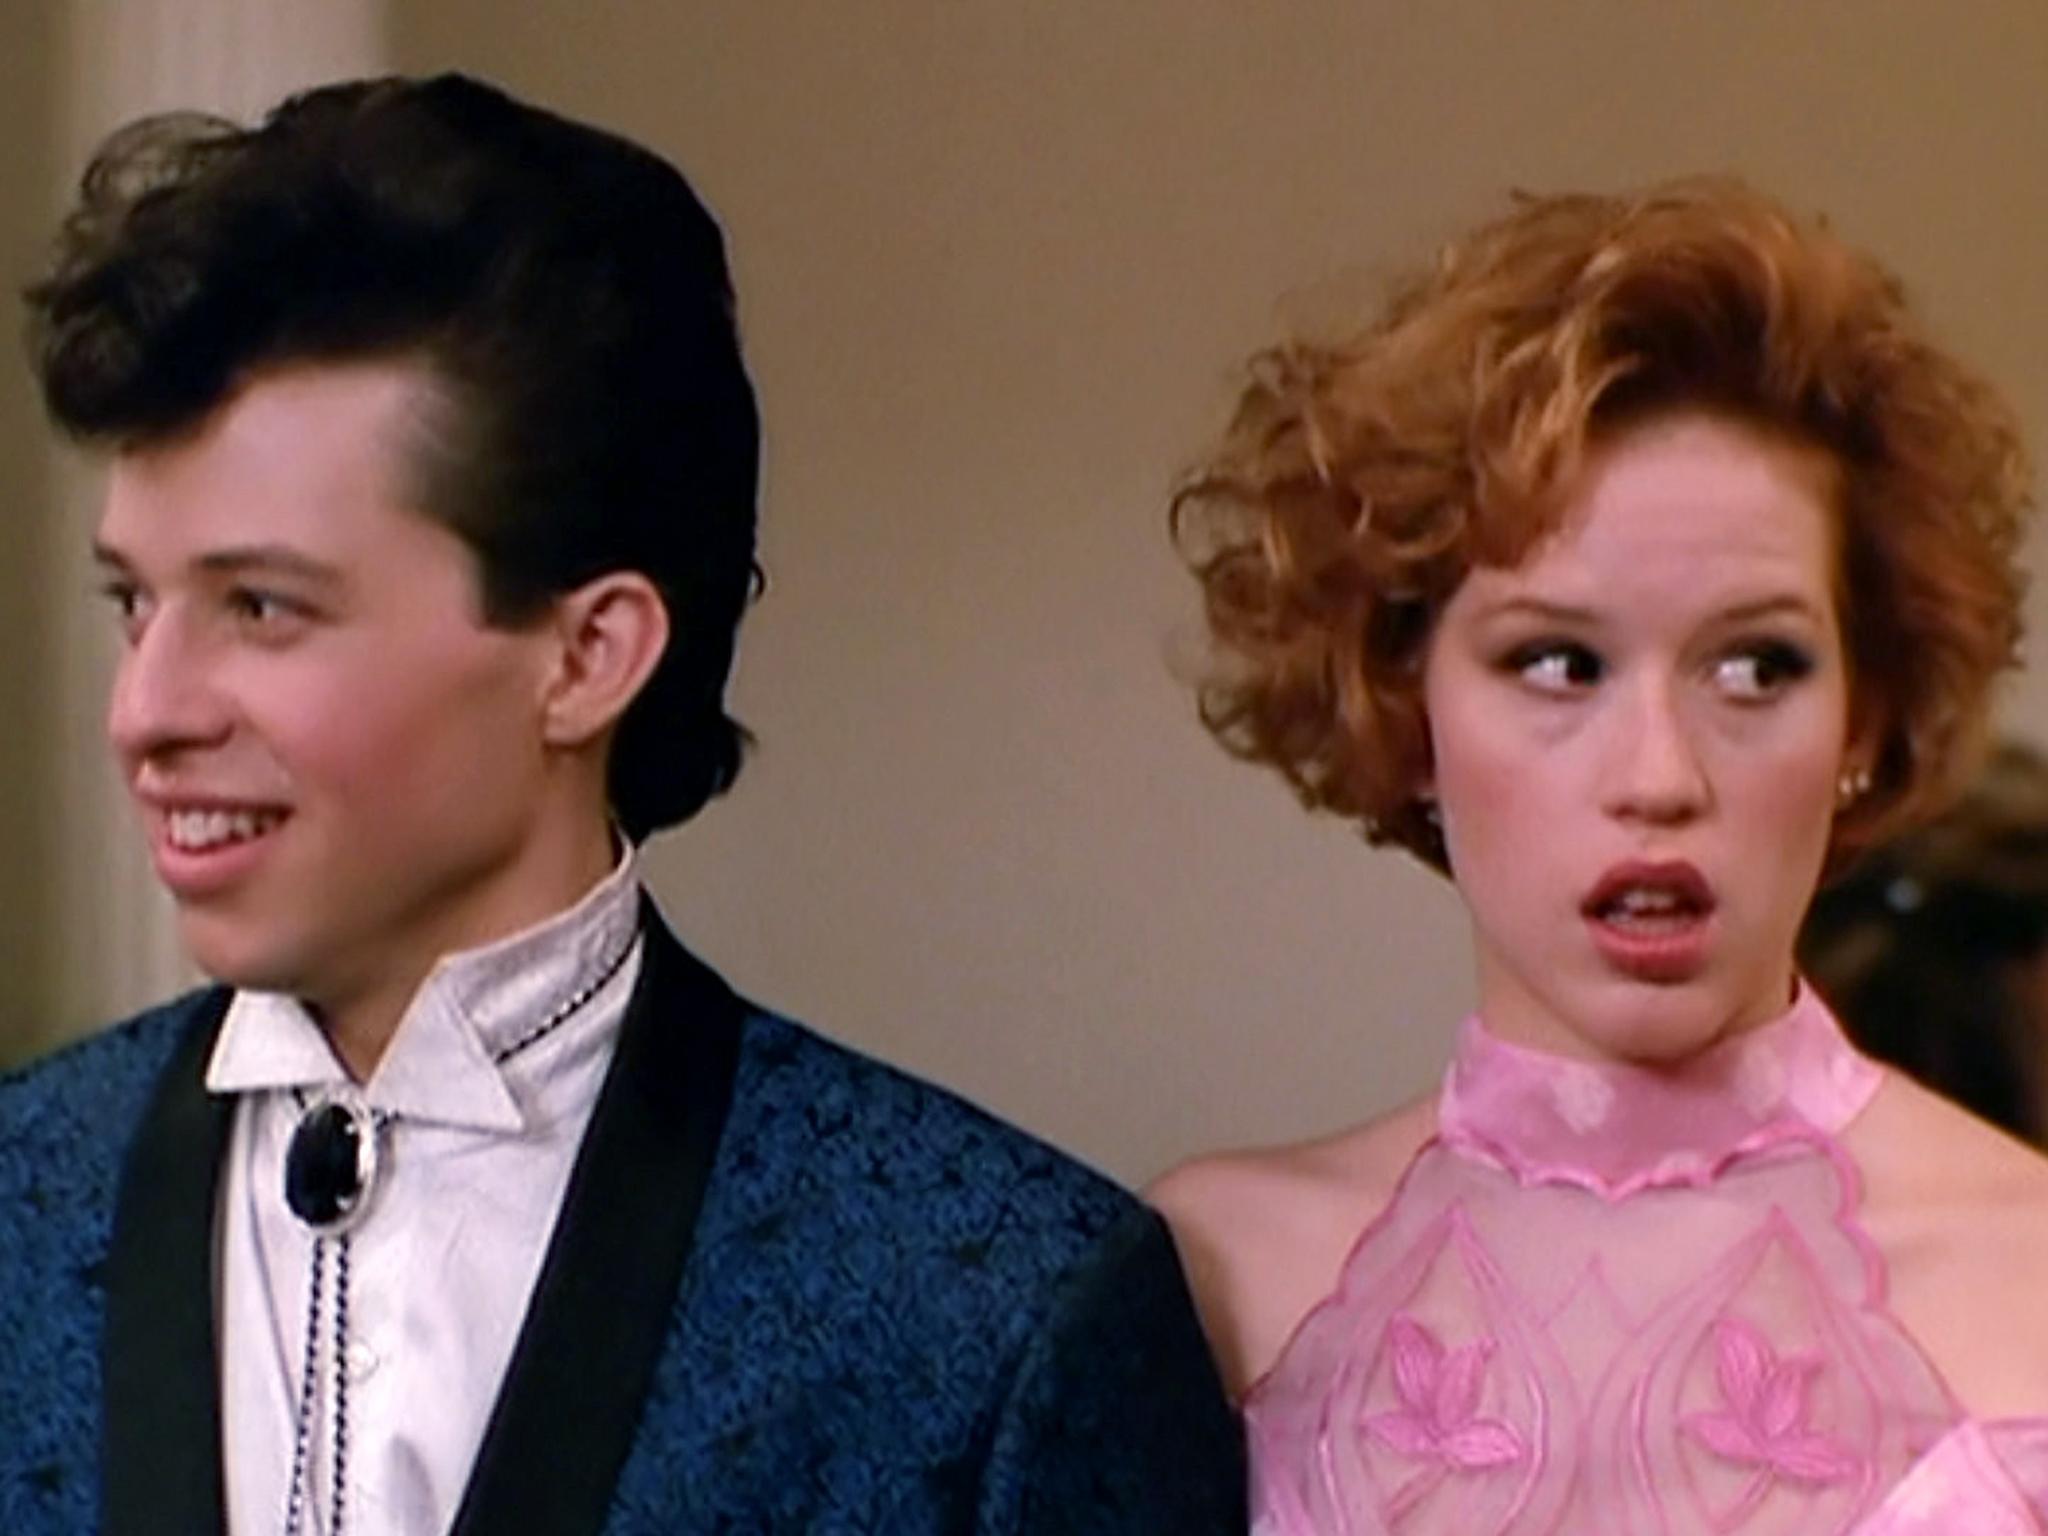 Time warp: Jon Cryer and Molly Ringwald in ‘Pretty in Pink’ which was also made in 1986